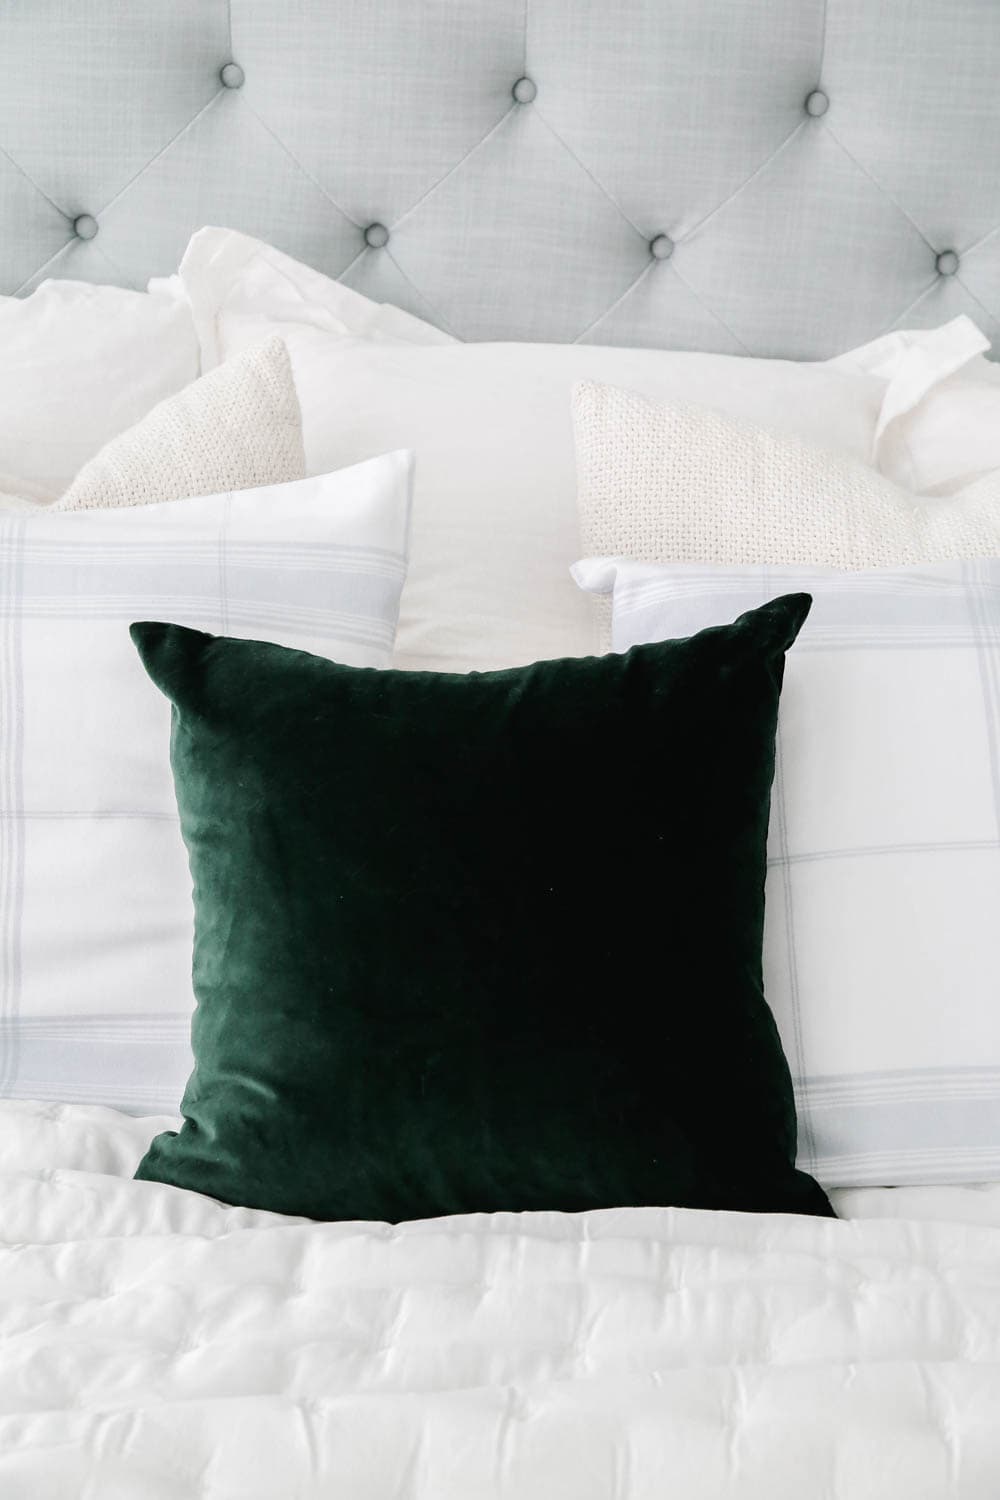 Add touches of green to your bedroom for the holiday season. #ABlissfulNest #bedroom #bedroomdecor